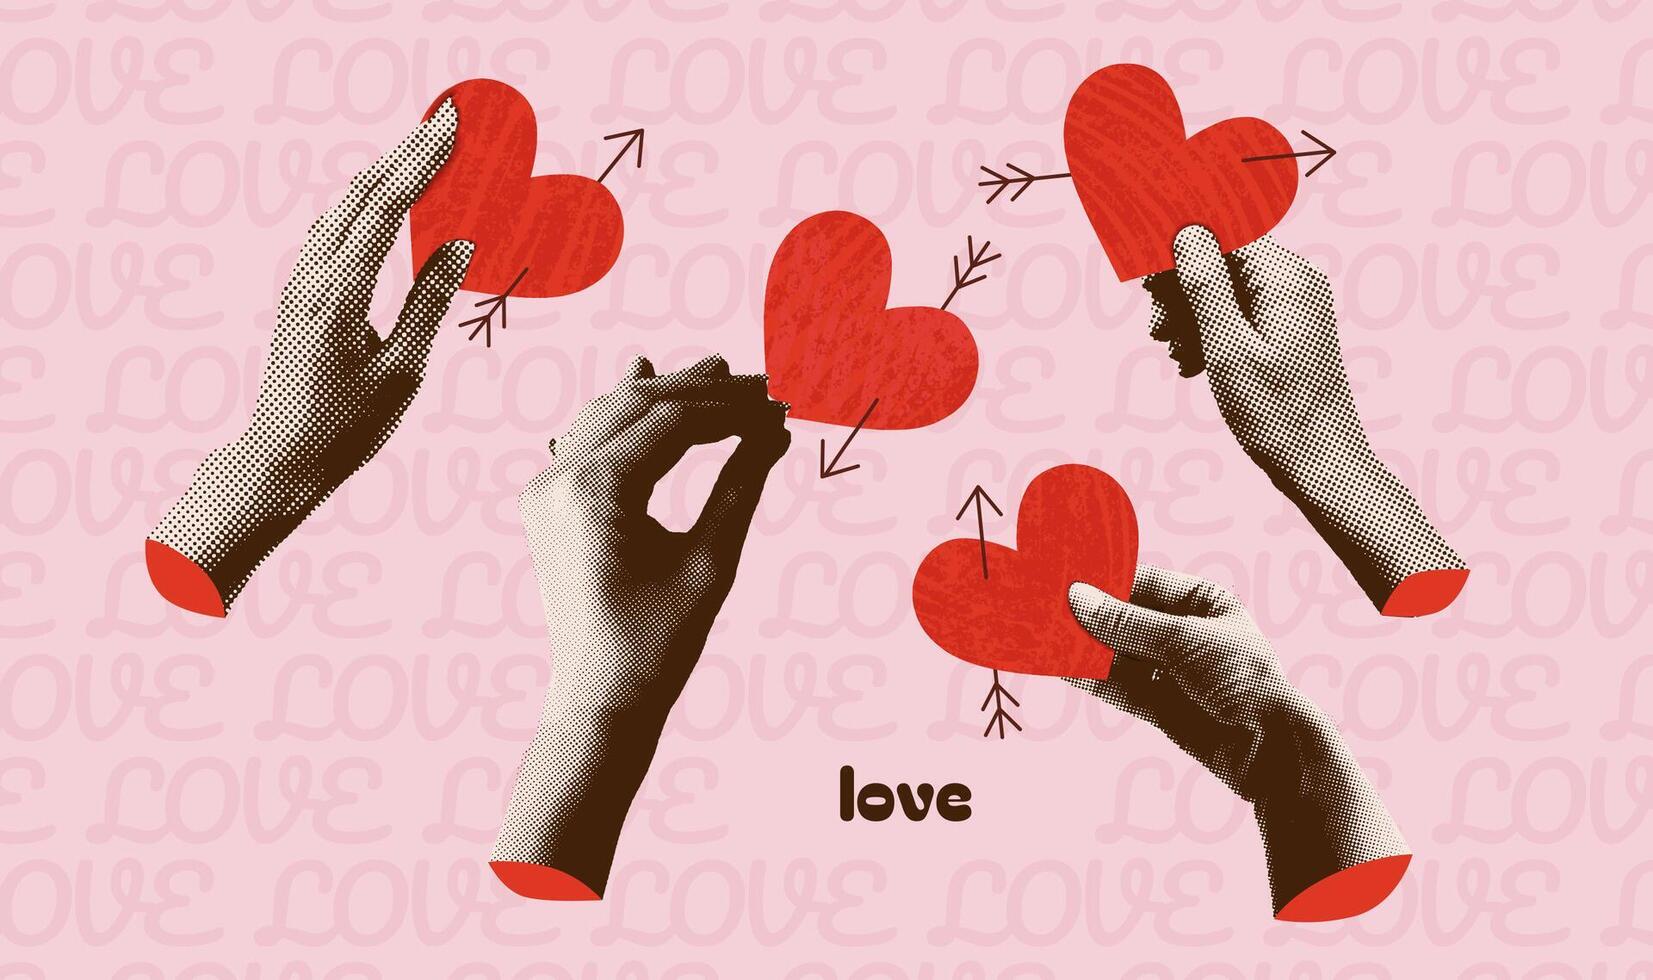 14 February collage set. Paper halftone hands holding hearts with grunge texture and linear arrows. Mixed media design with cut out paper female palms for Valentine s day events. Vector illustration